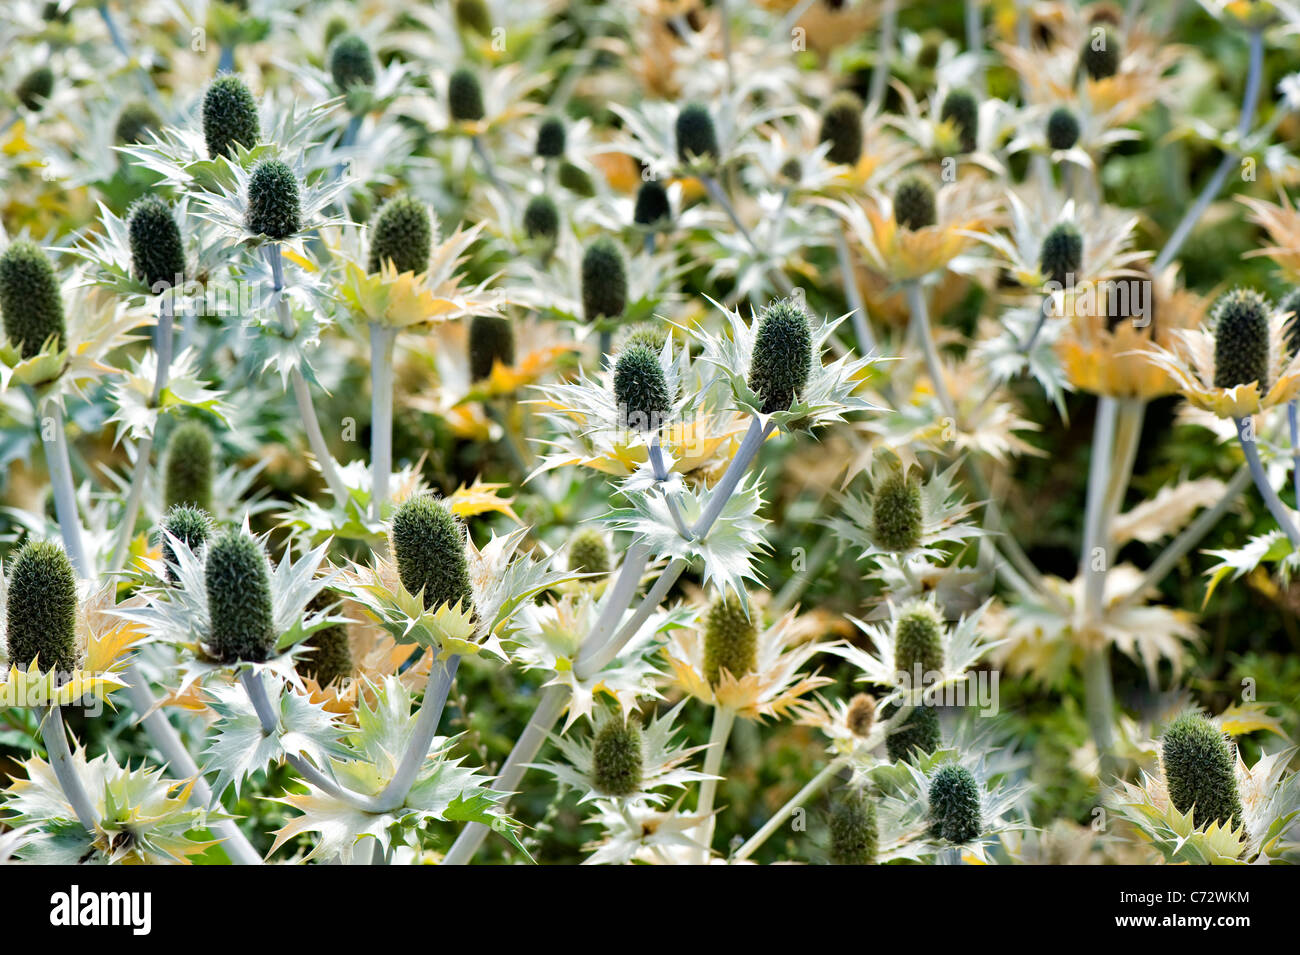 Close-up image of Eryngium Giganteum - 'Miss Willmotts Ghost' flowers - also known as Giant sea holly. Stock Photo